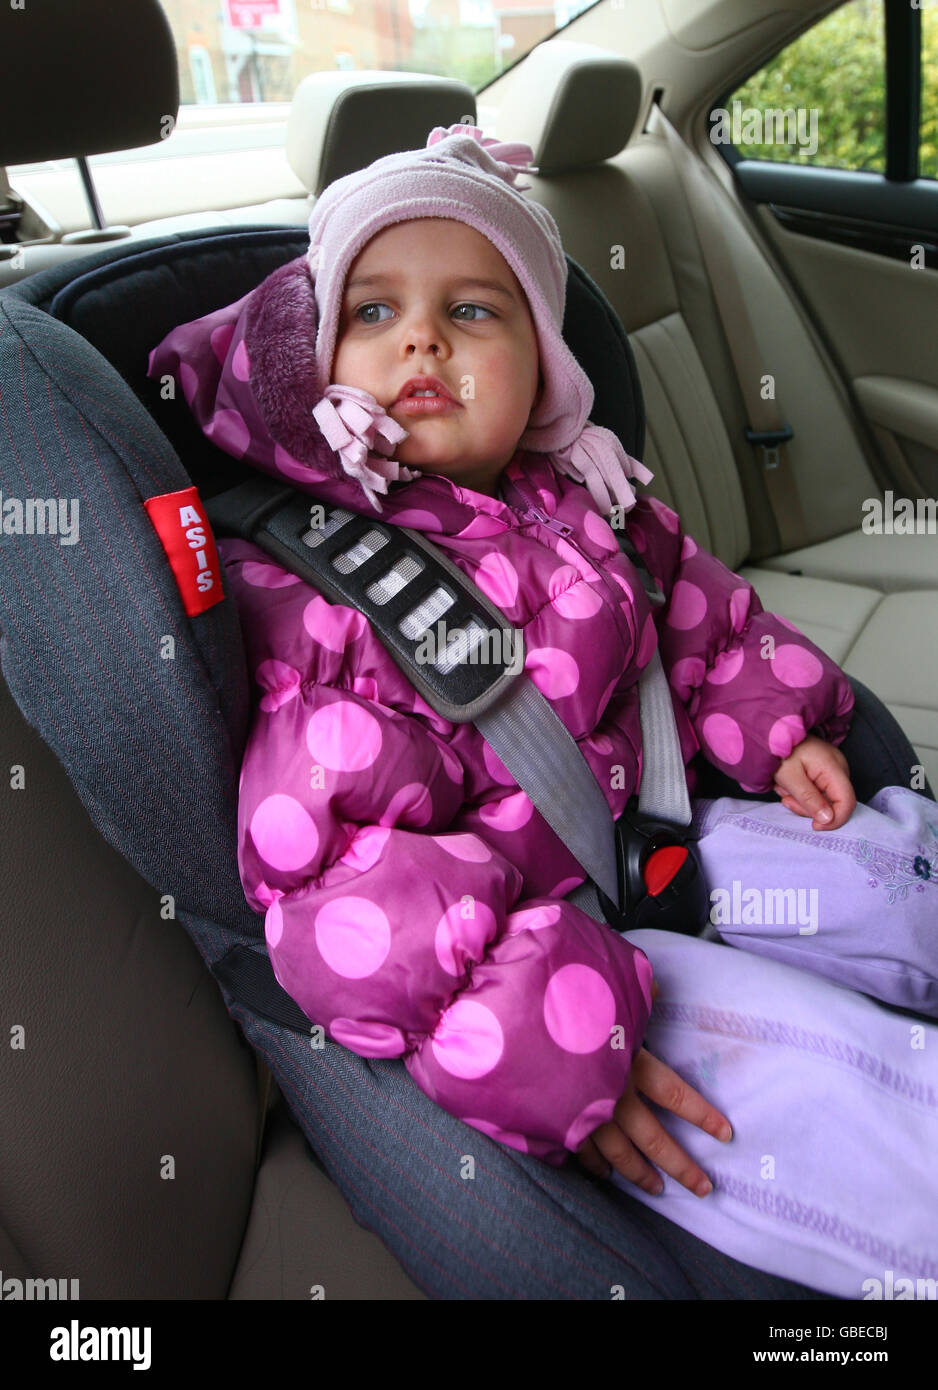 Child seat safety. A young girl prepares for a journey in a child's car seat near Ashford in Kent, as a survey reveals two in three car seats are not fitted properly. Stock Photo